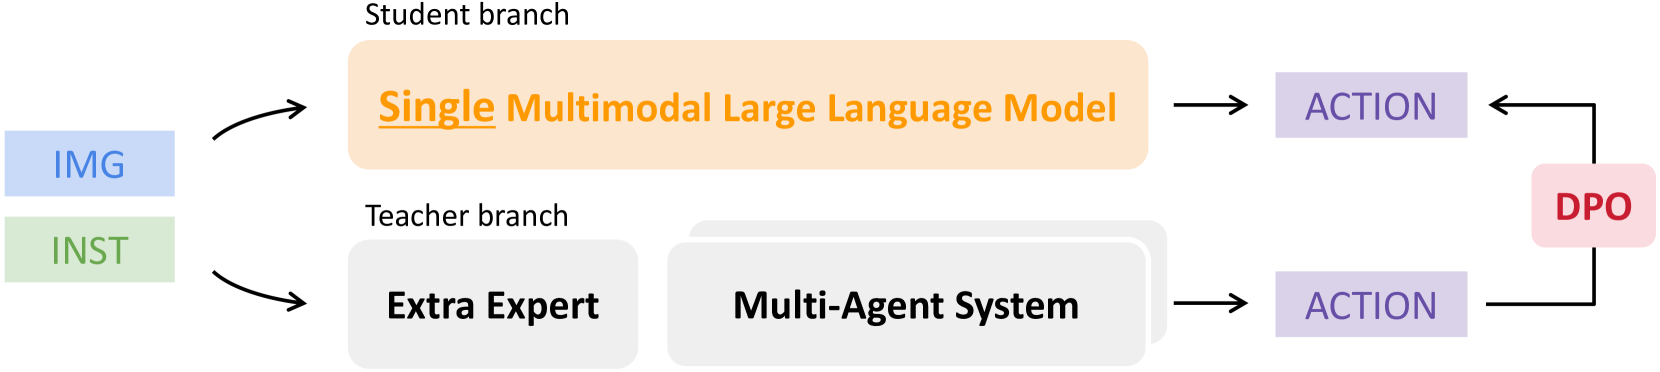 Do We Really Need a Complex Agent System? Distill Embodied Agent into a Single Model